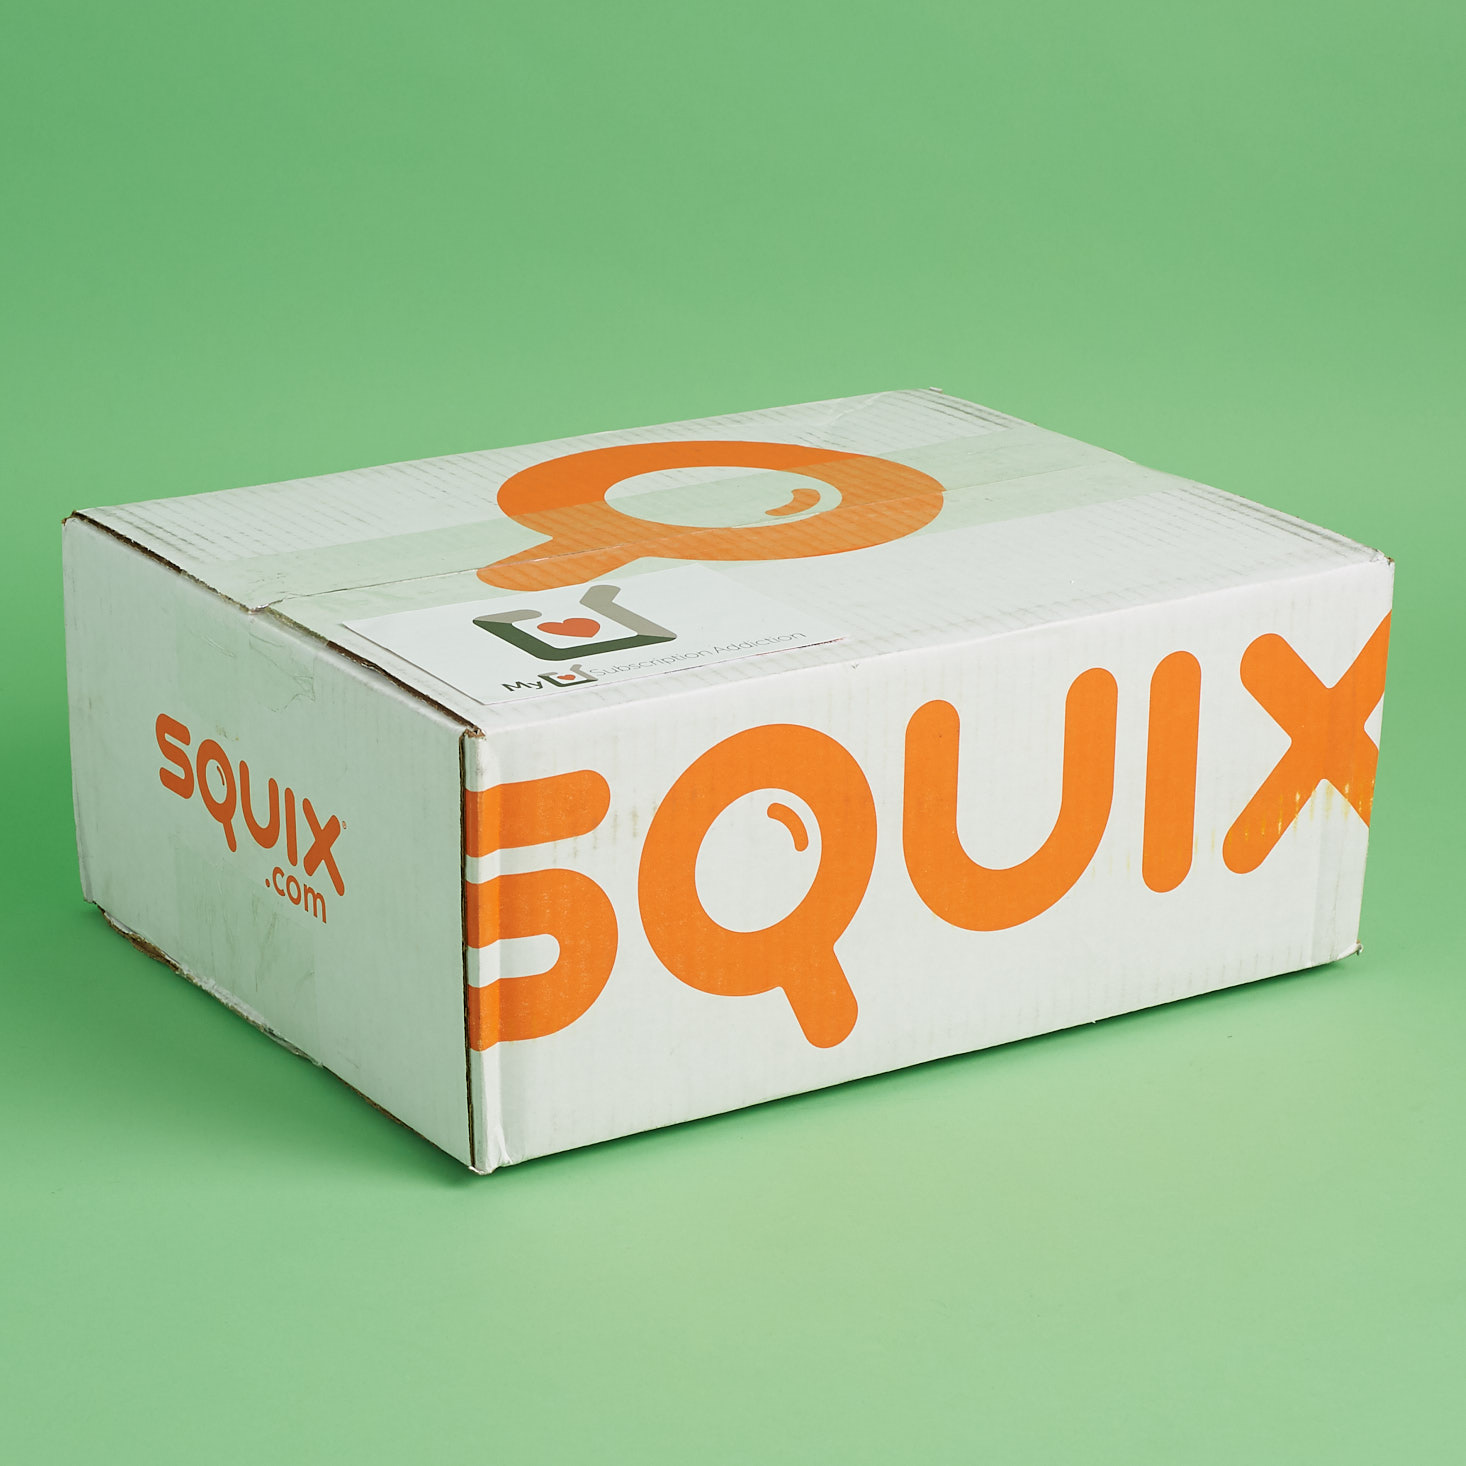 Squix Introductory QBox Review + 2 FREE Gifts – November 2017